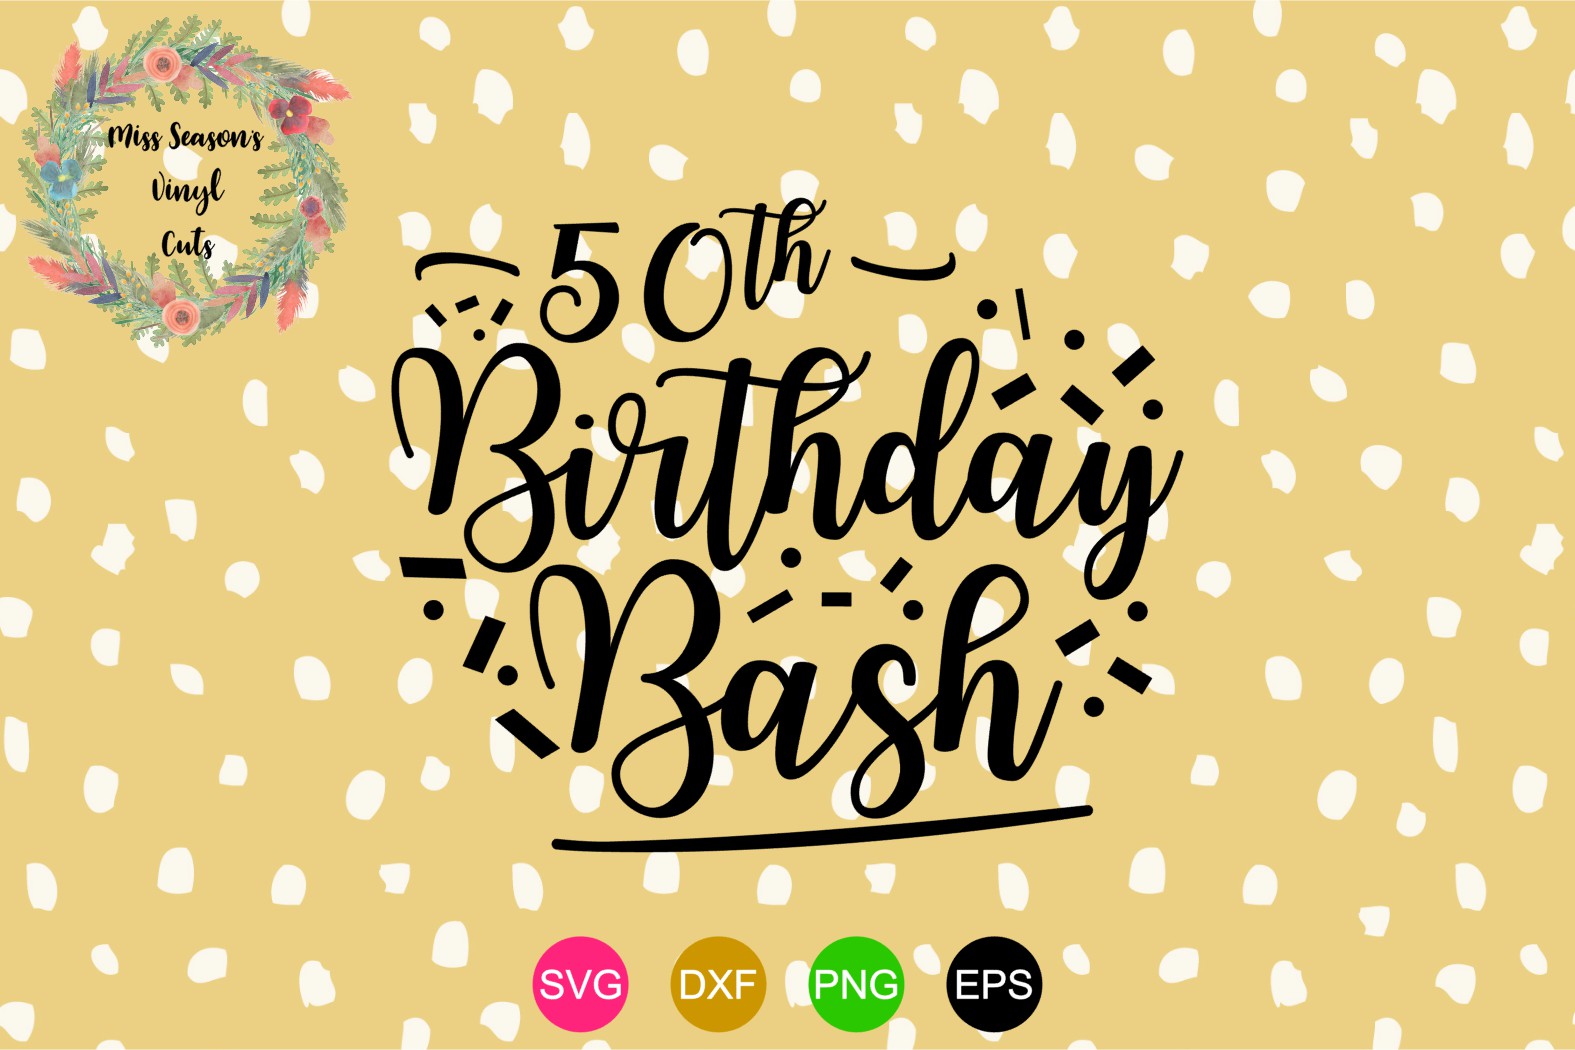 Download 50th Birthday Bash - SVG Eps, DXF, PNG Party With Numbers